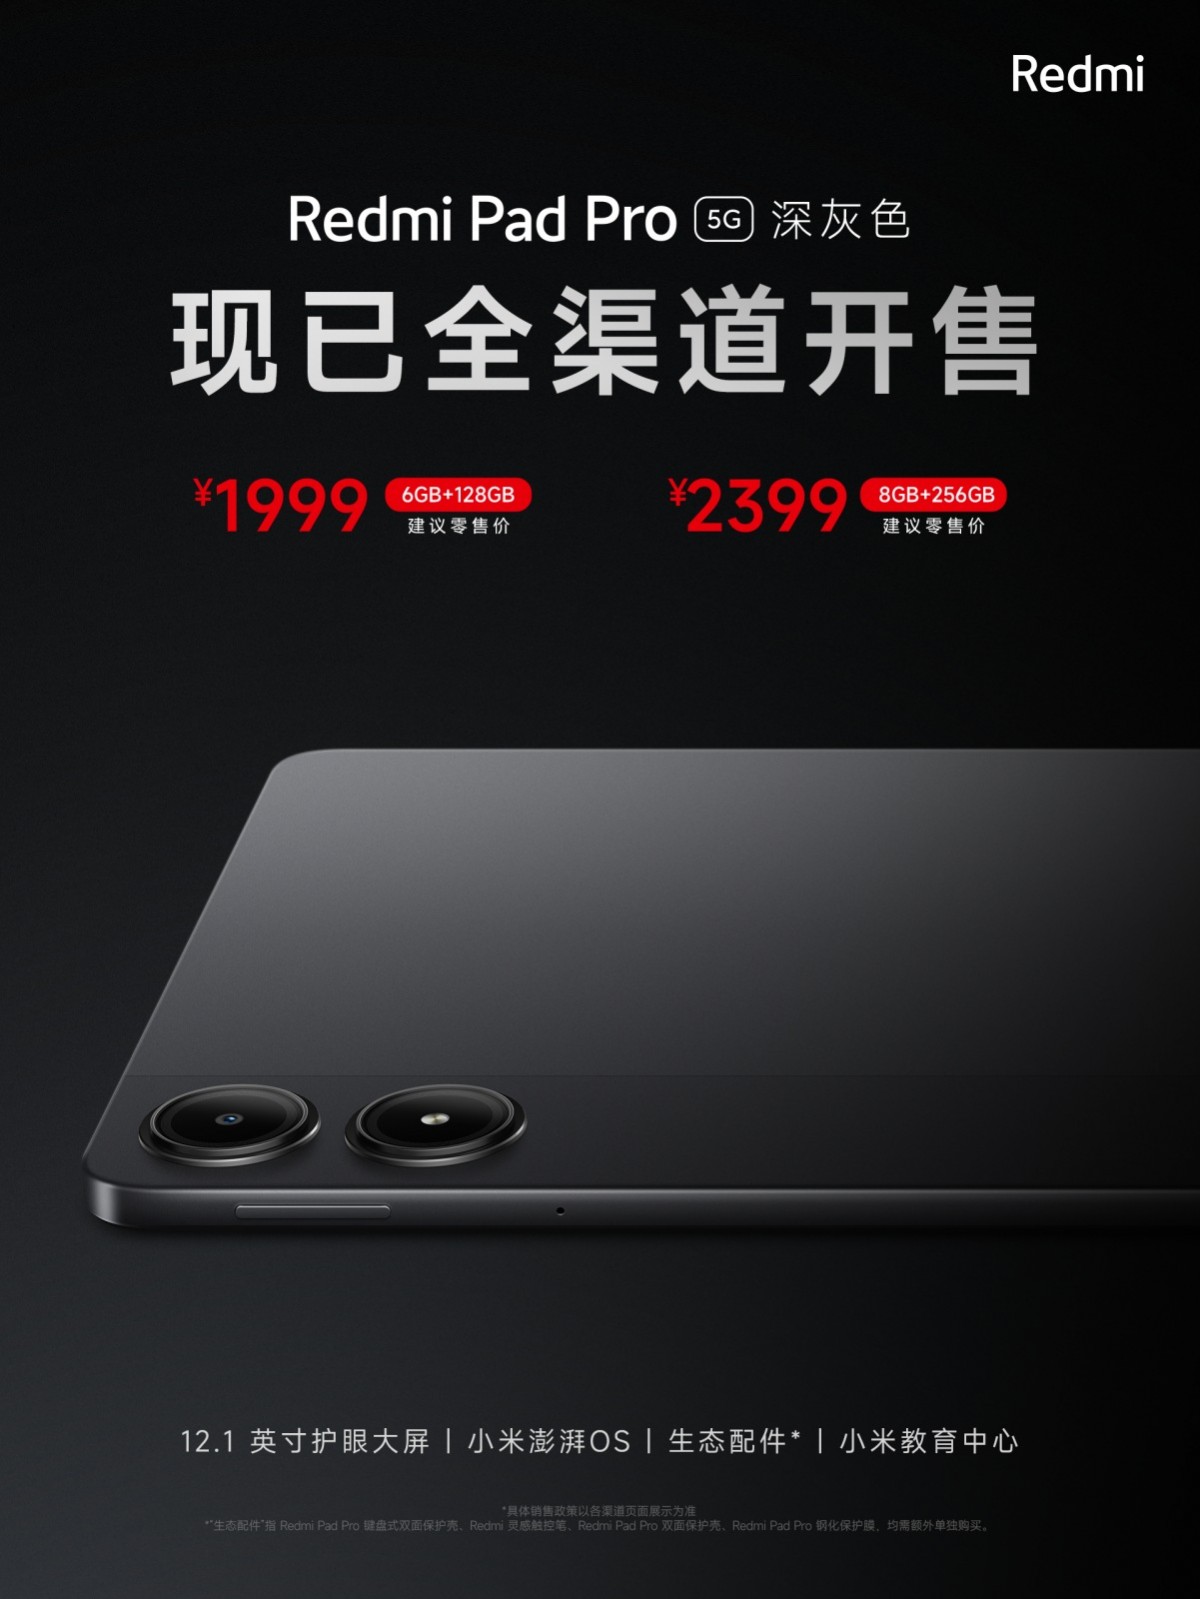 Xiaomi reintroduces Redmi Pad Pro, this time with 5G